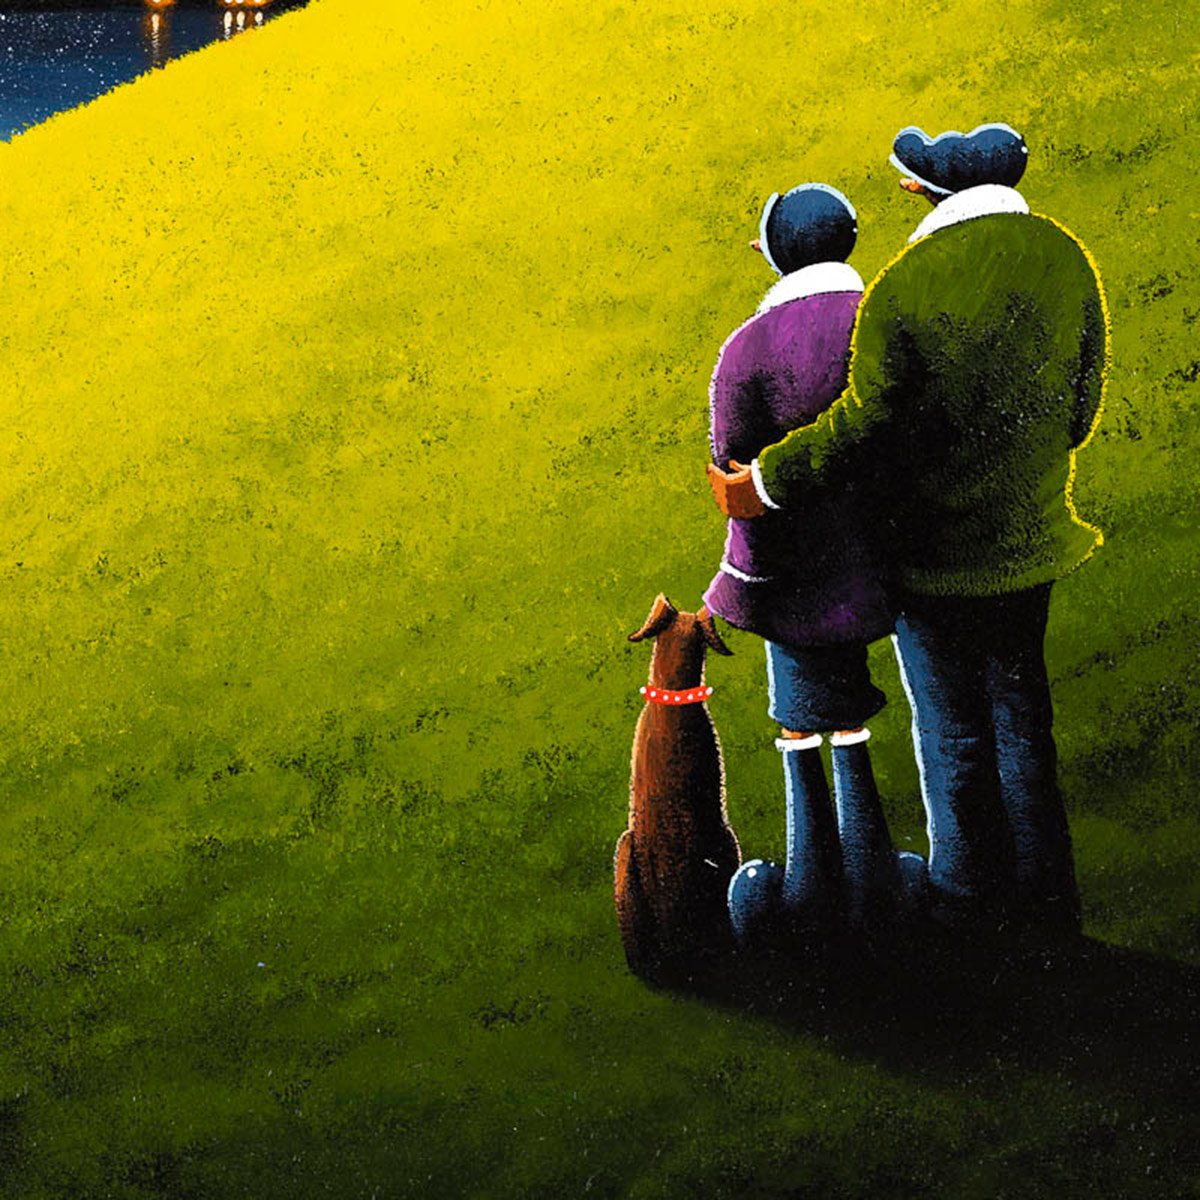 Our Love Entwined David Renshaw Framed